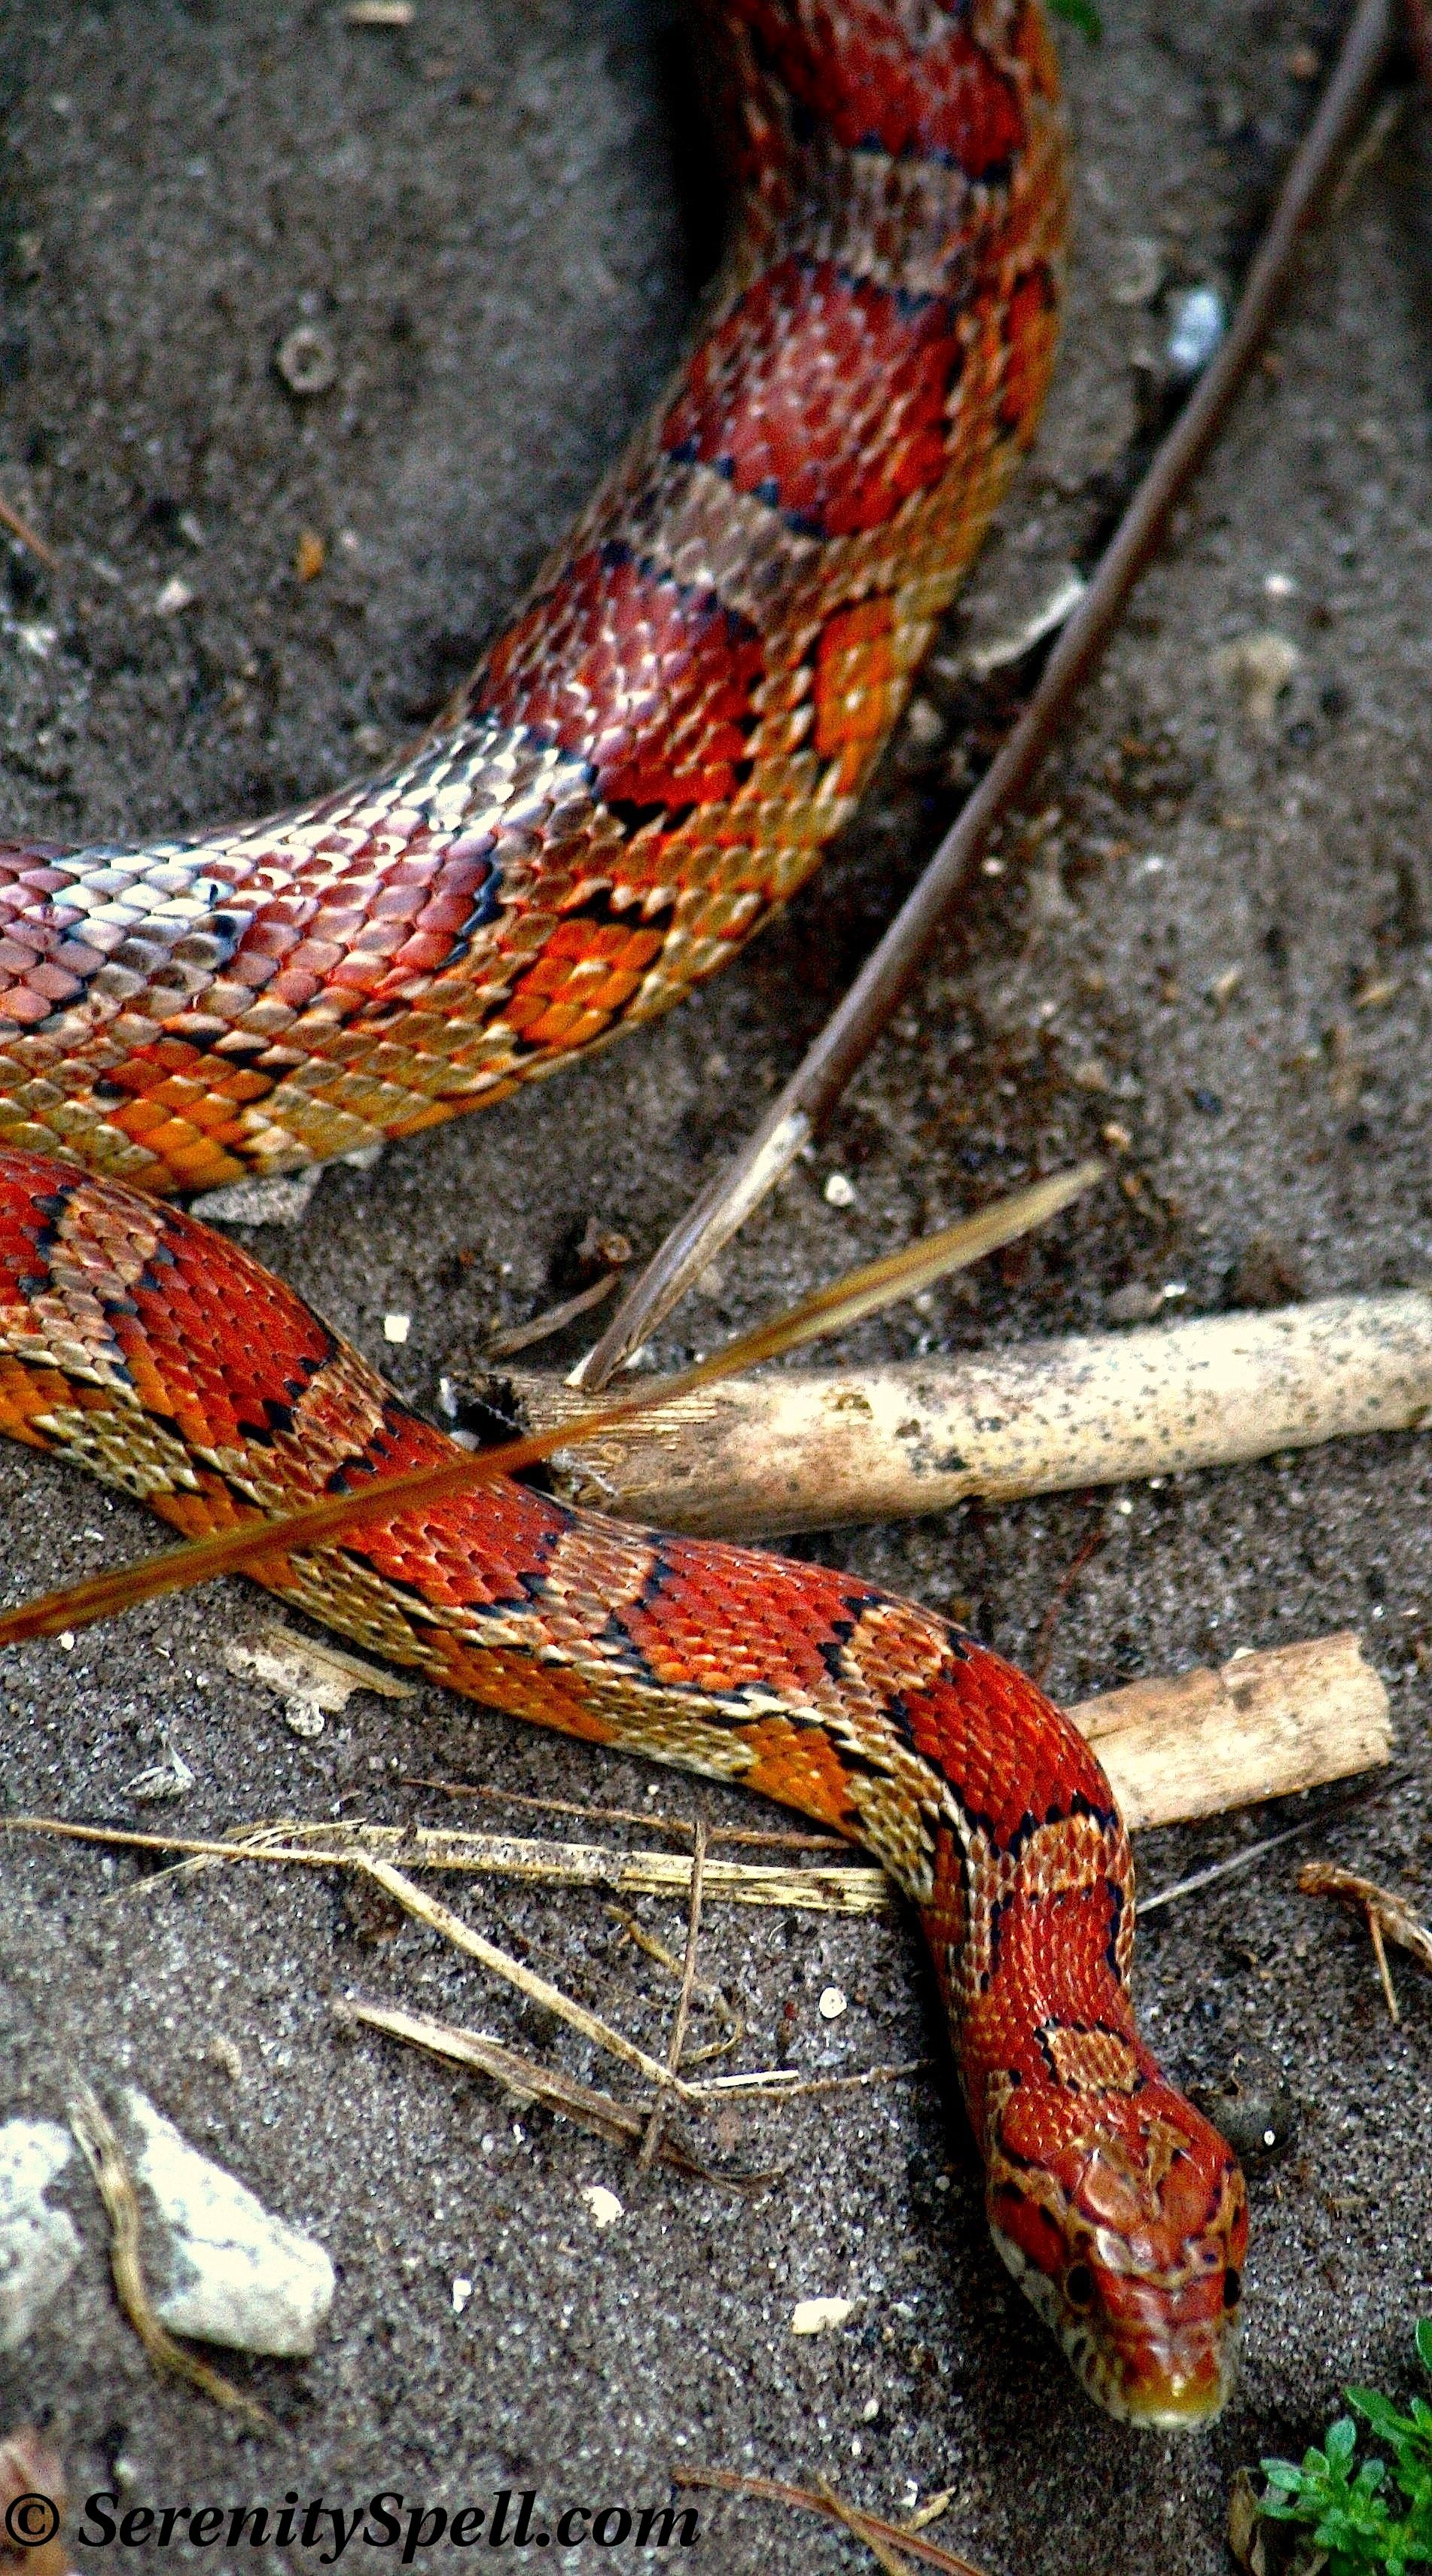 Corn Snake, or Red Rat Snake, Florida Wetlands. This was